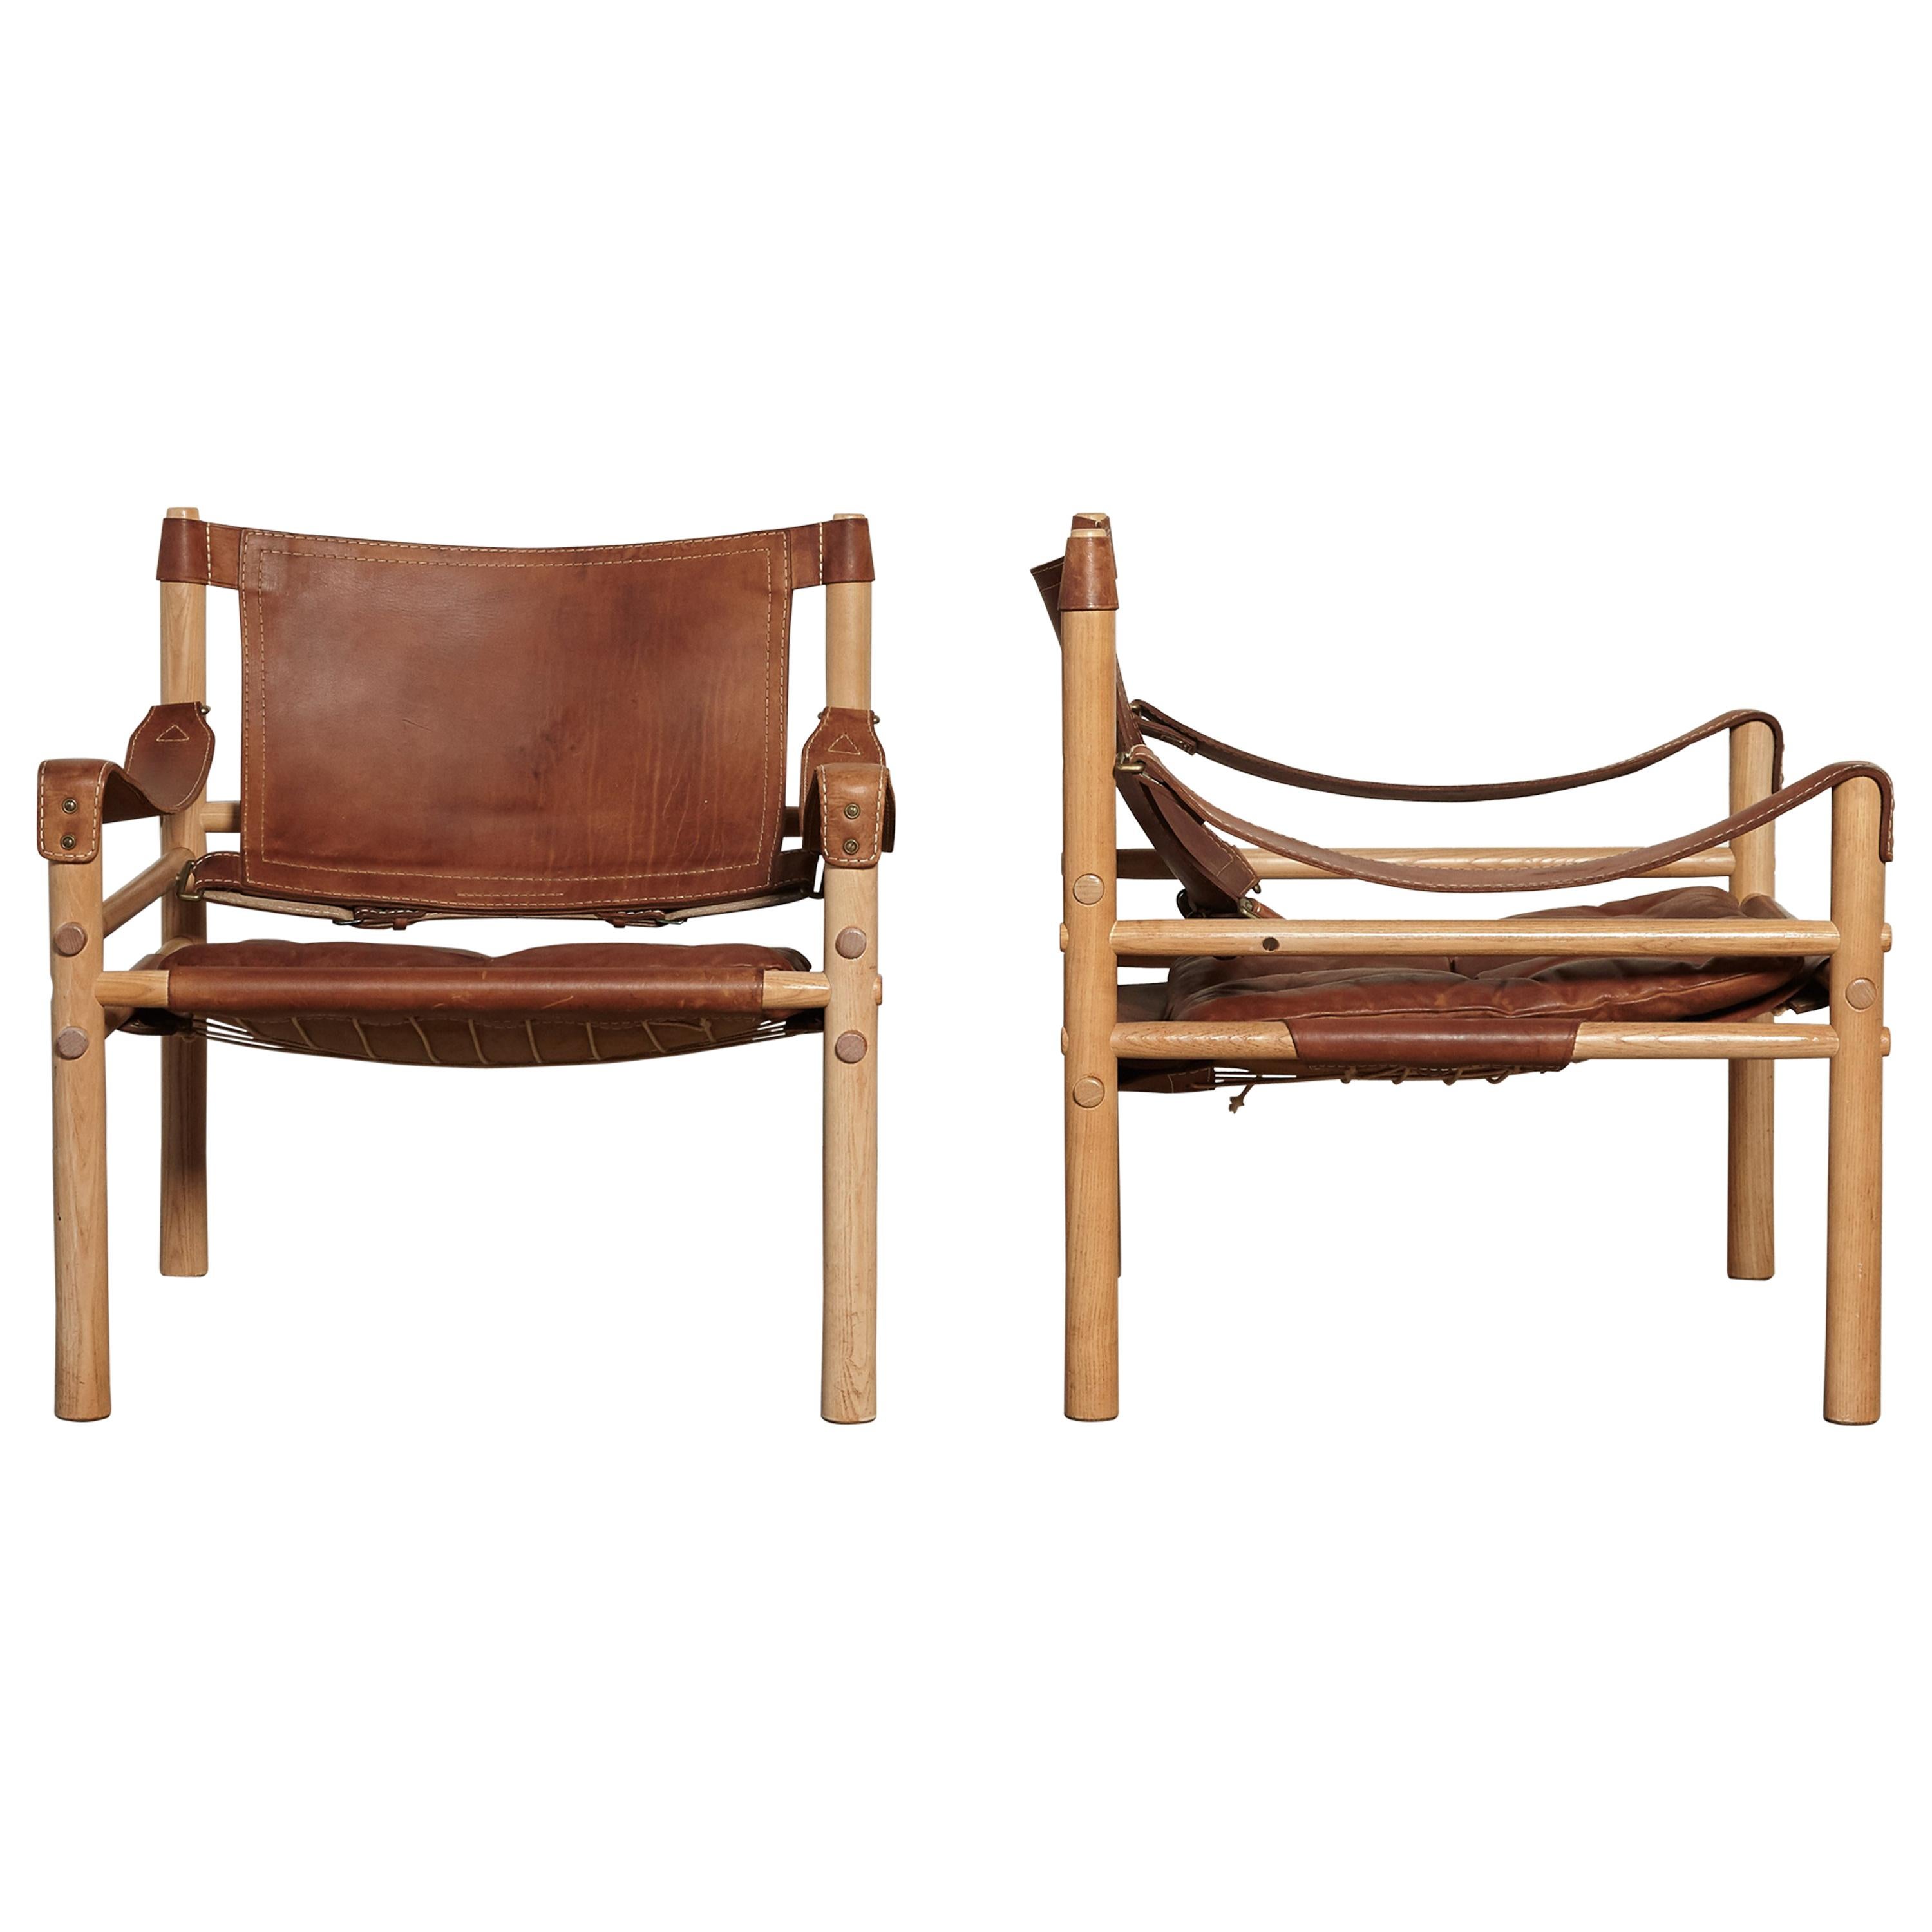 Pair of Arne Norell Sirocco Safari Chairs, Norell Mobel, Sweden, 1970s